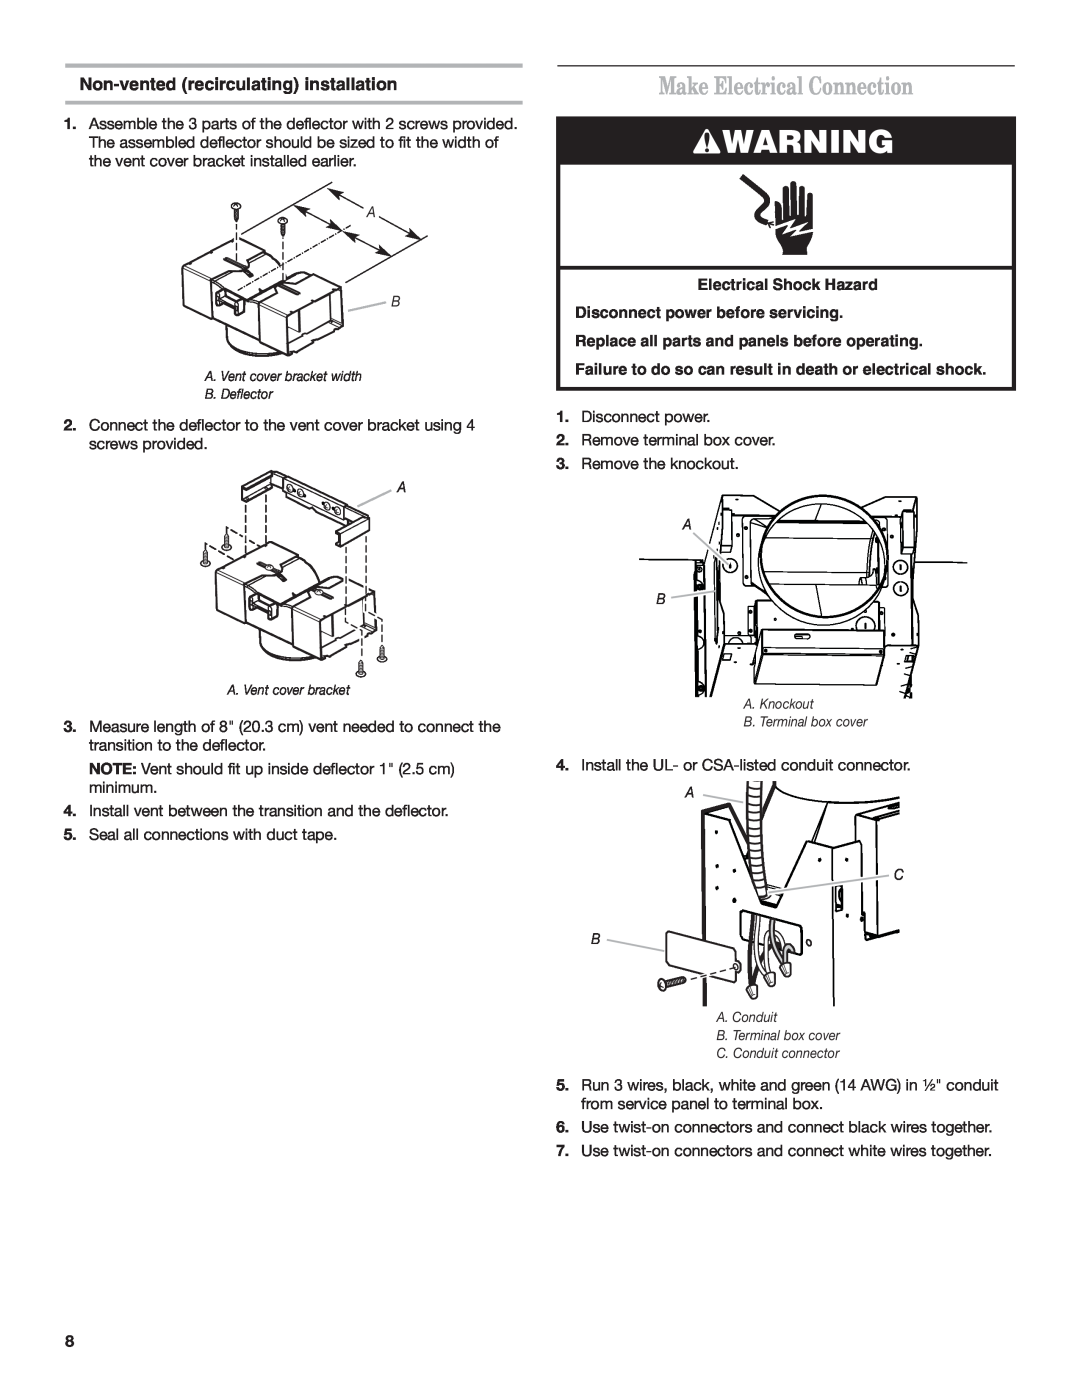 Whirlpool 19760268A installation instructions Make Electrical Connection, Non-vented recirculating installation 